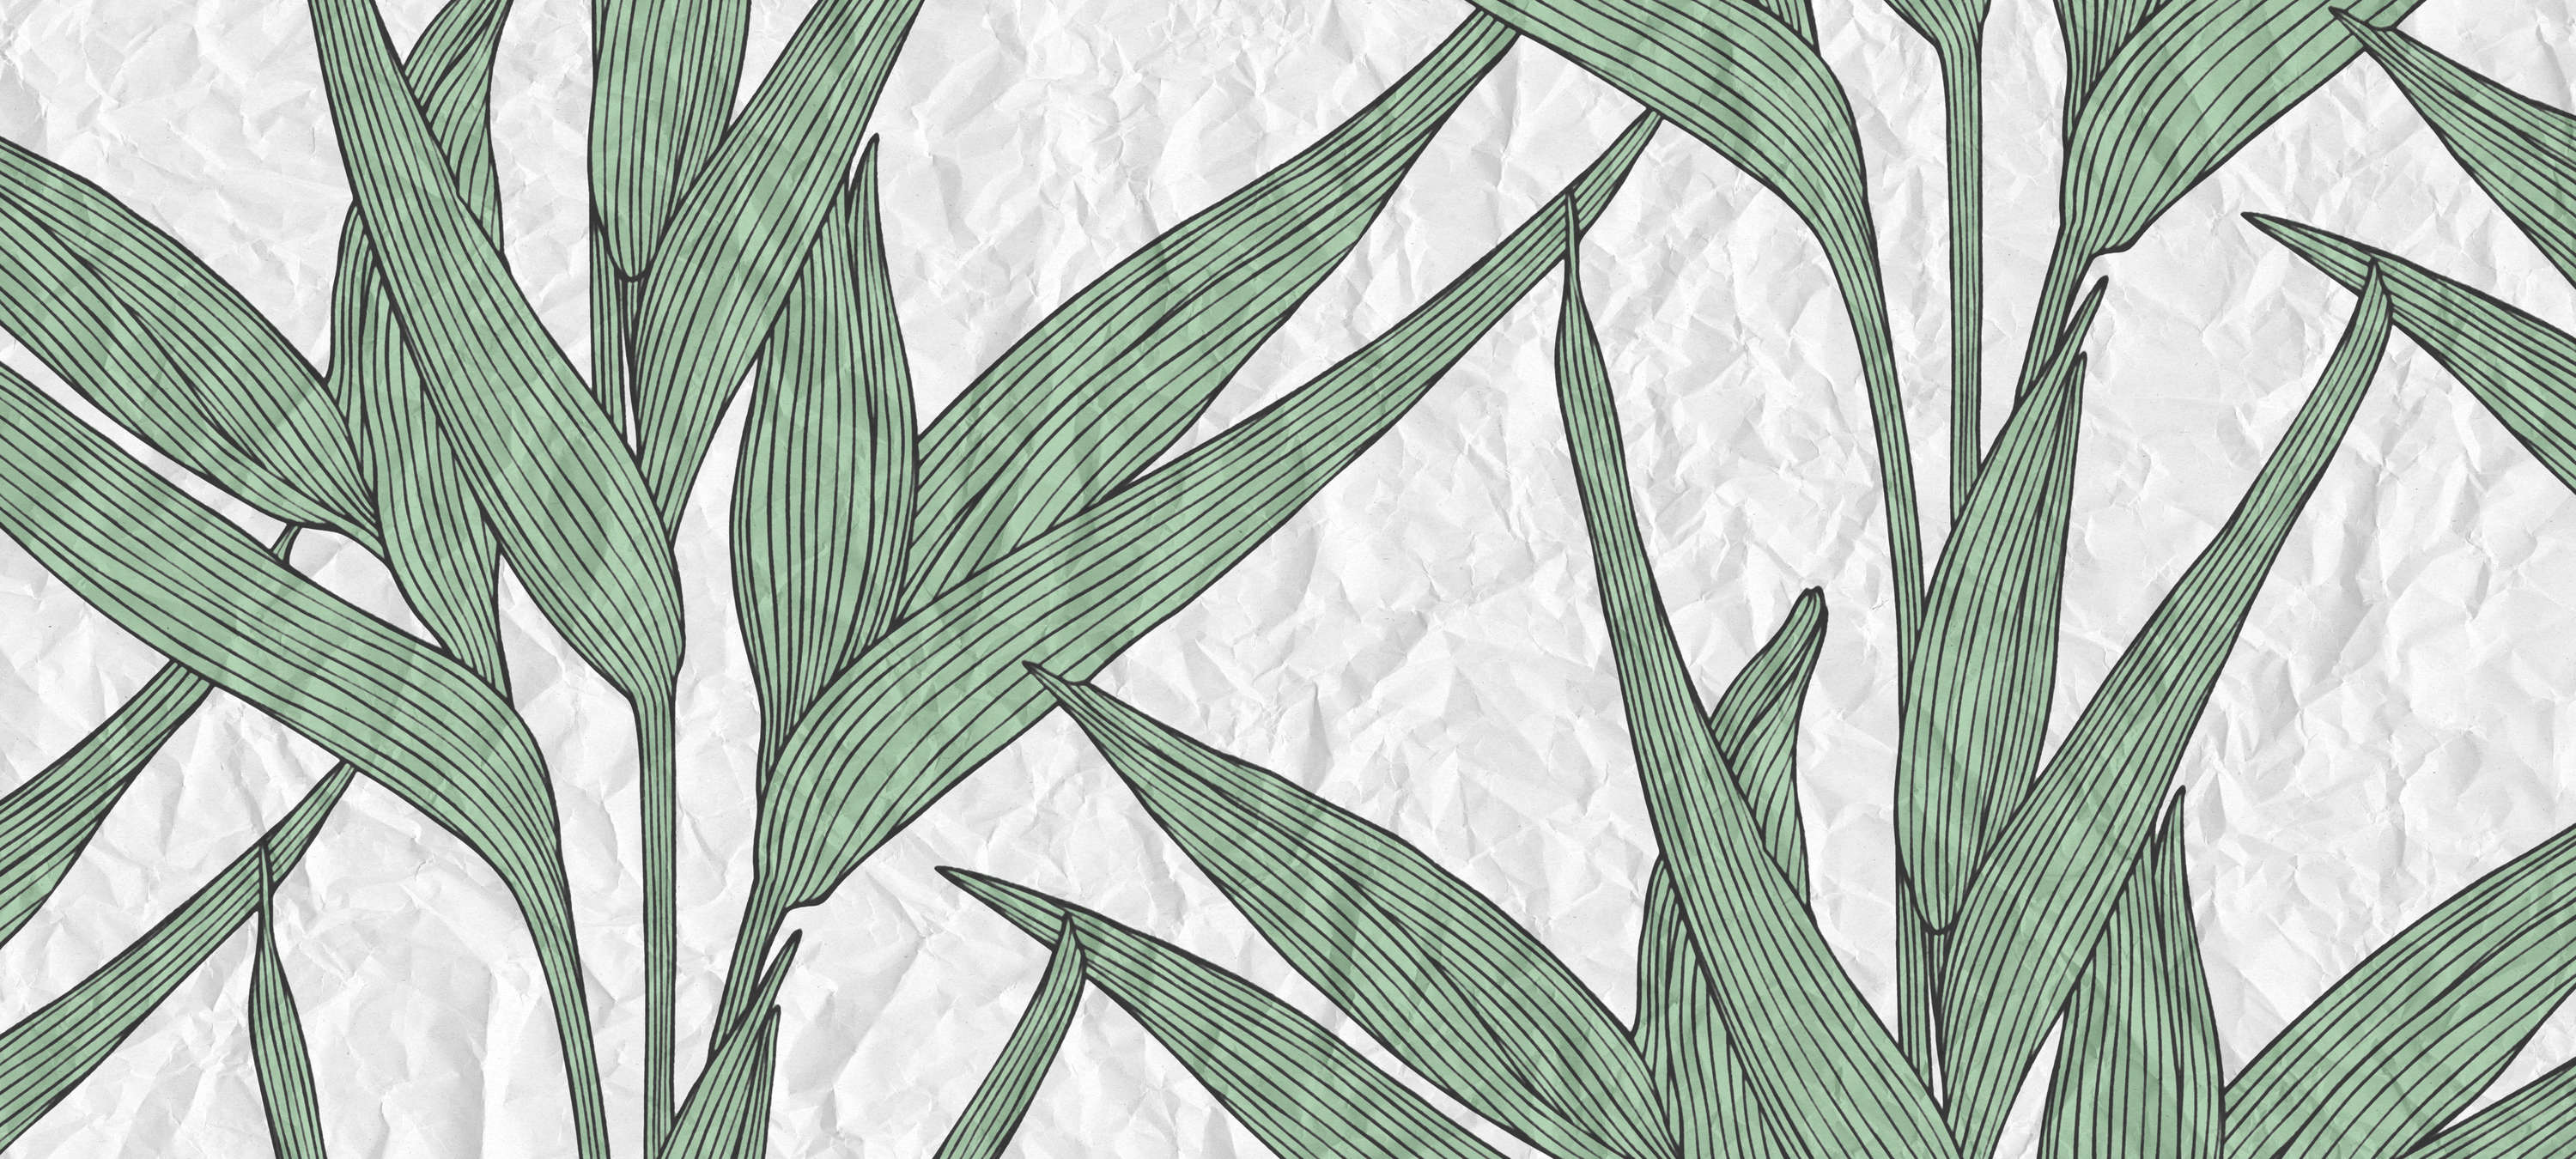             Photo wallpaper leaves pattern & paper look - Green, White
        